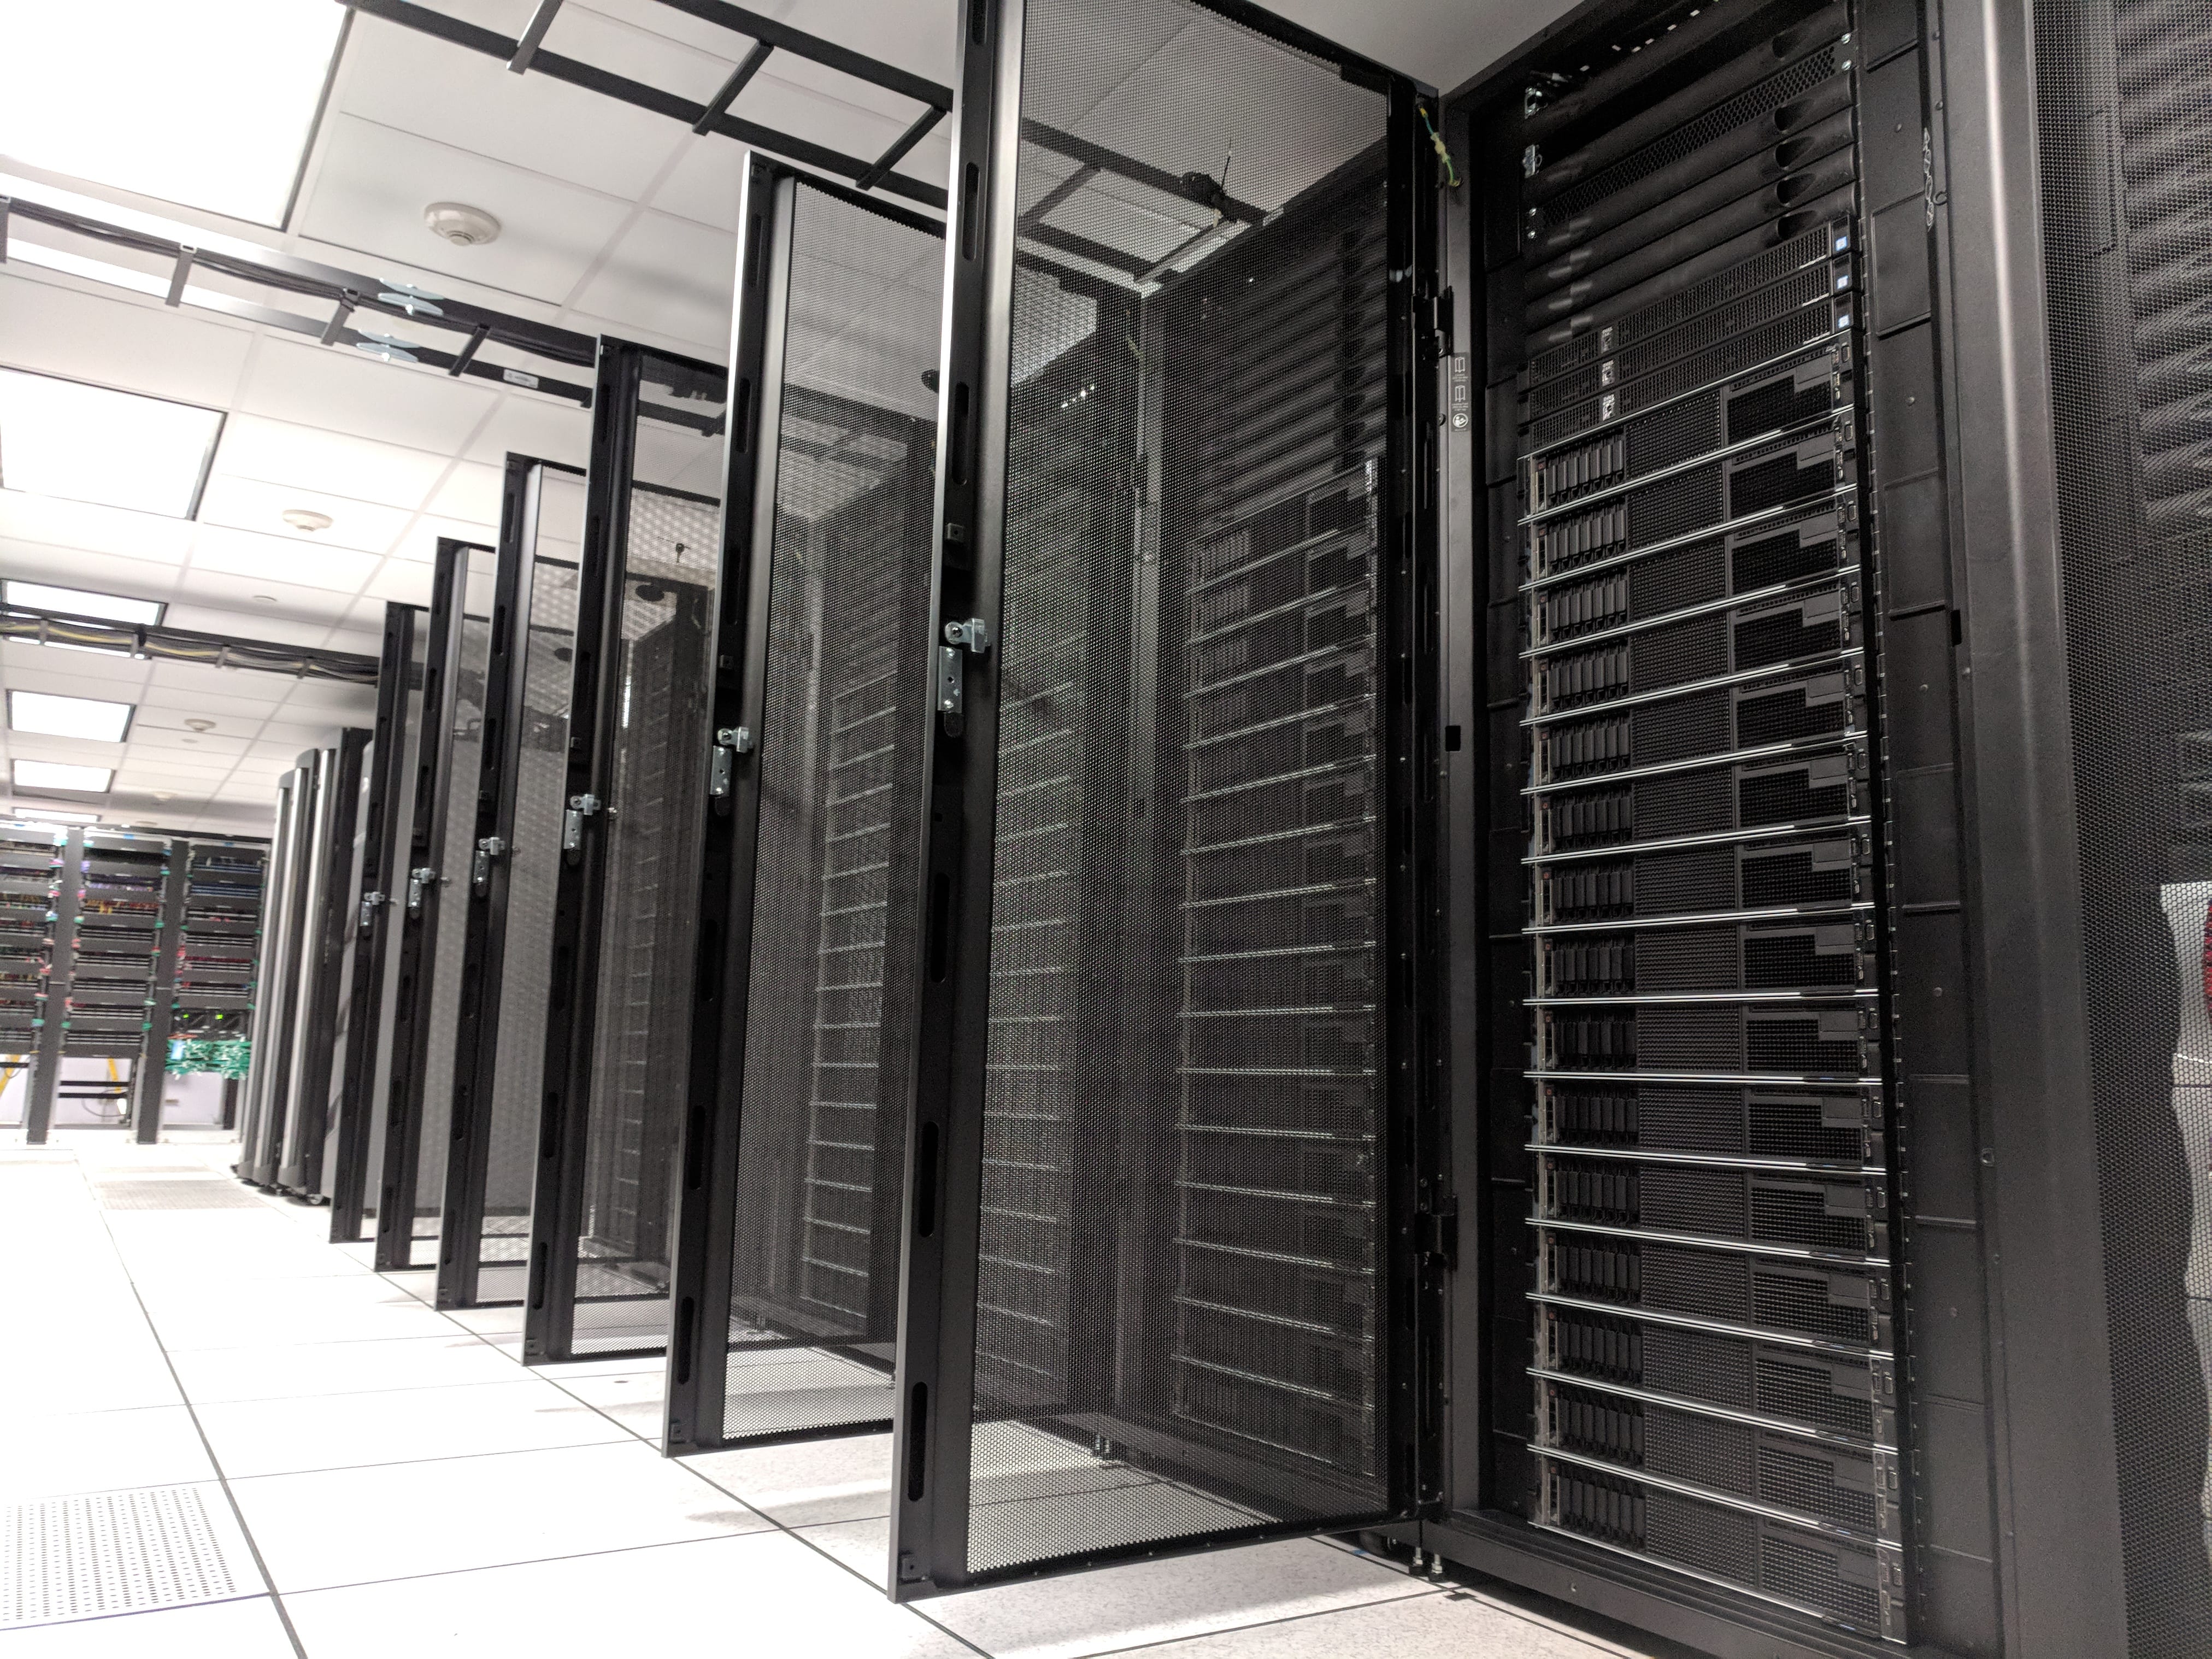 Ground level view of server racks with doors open showing servers in a row